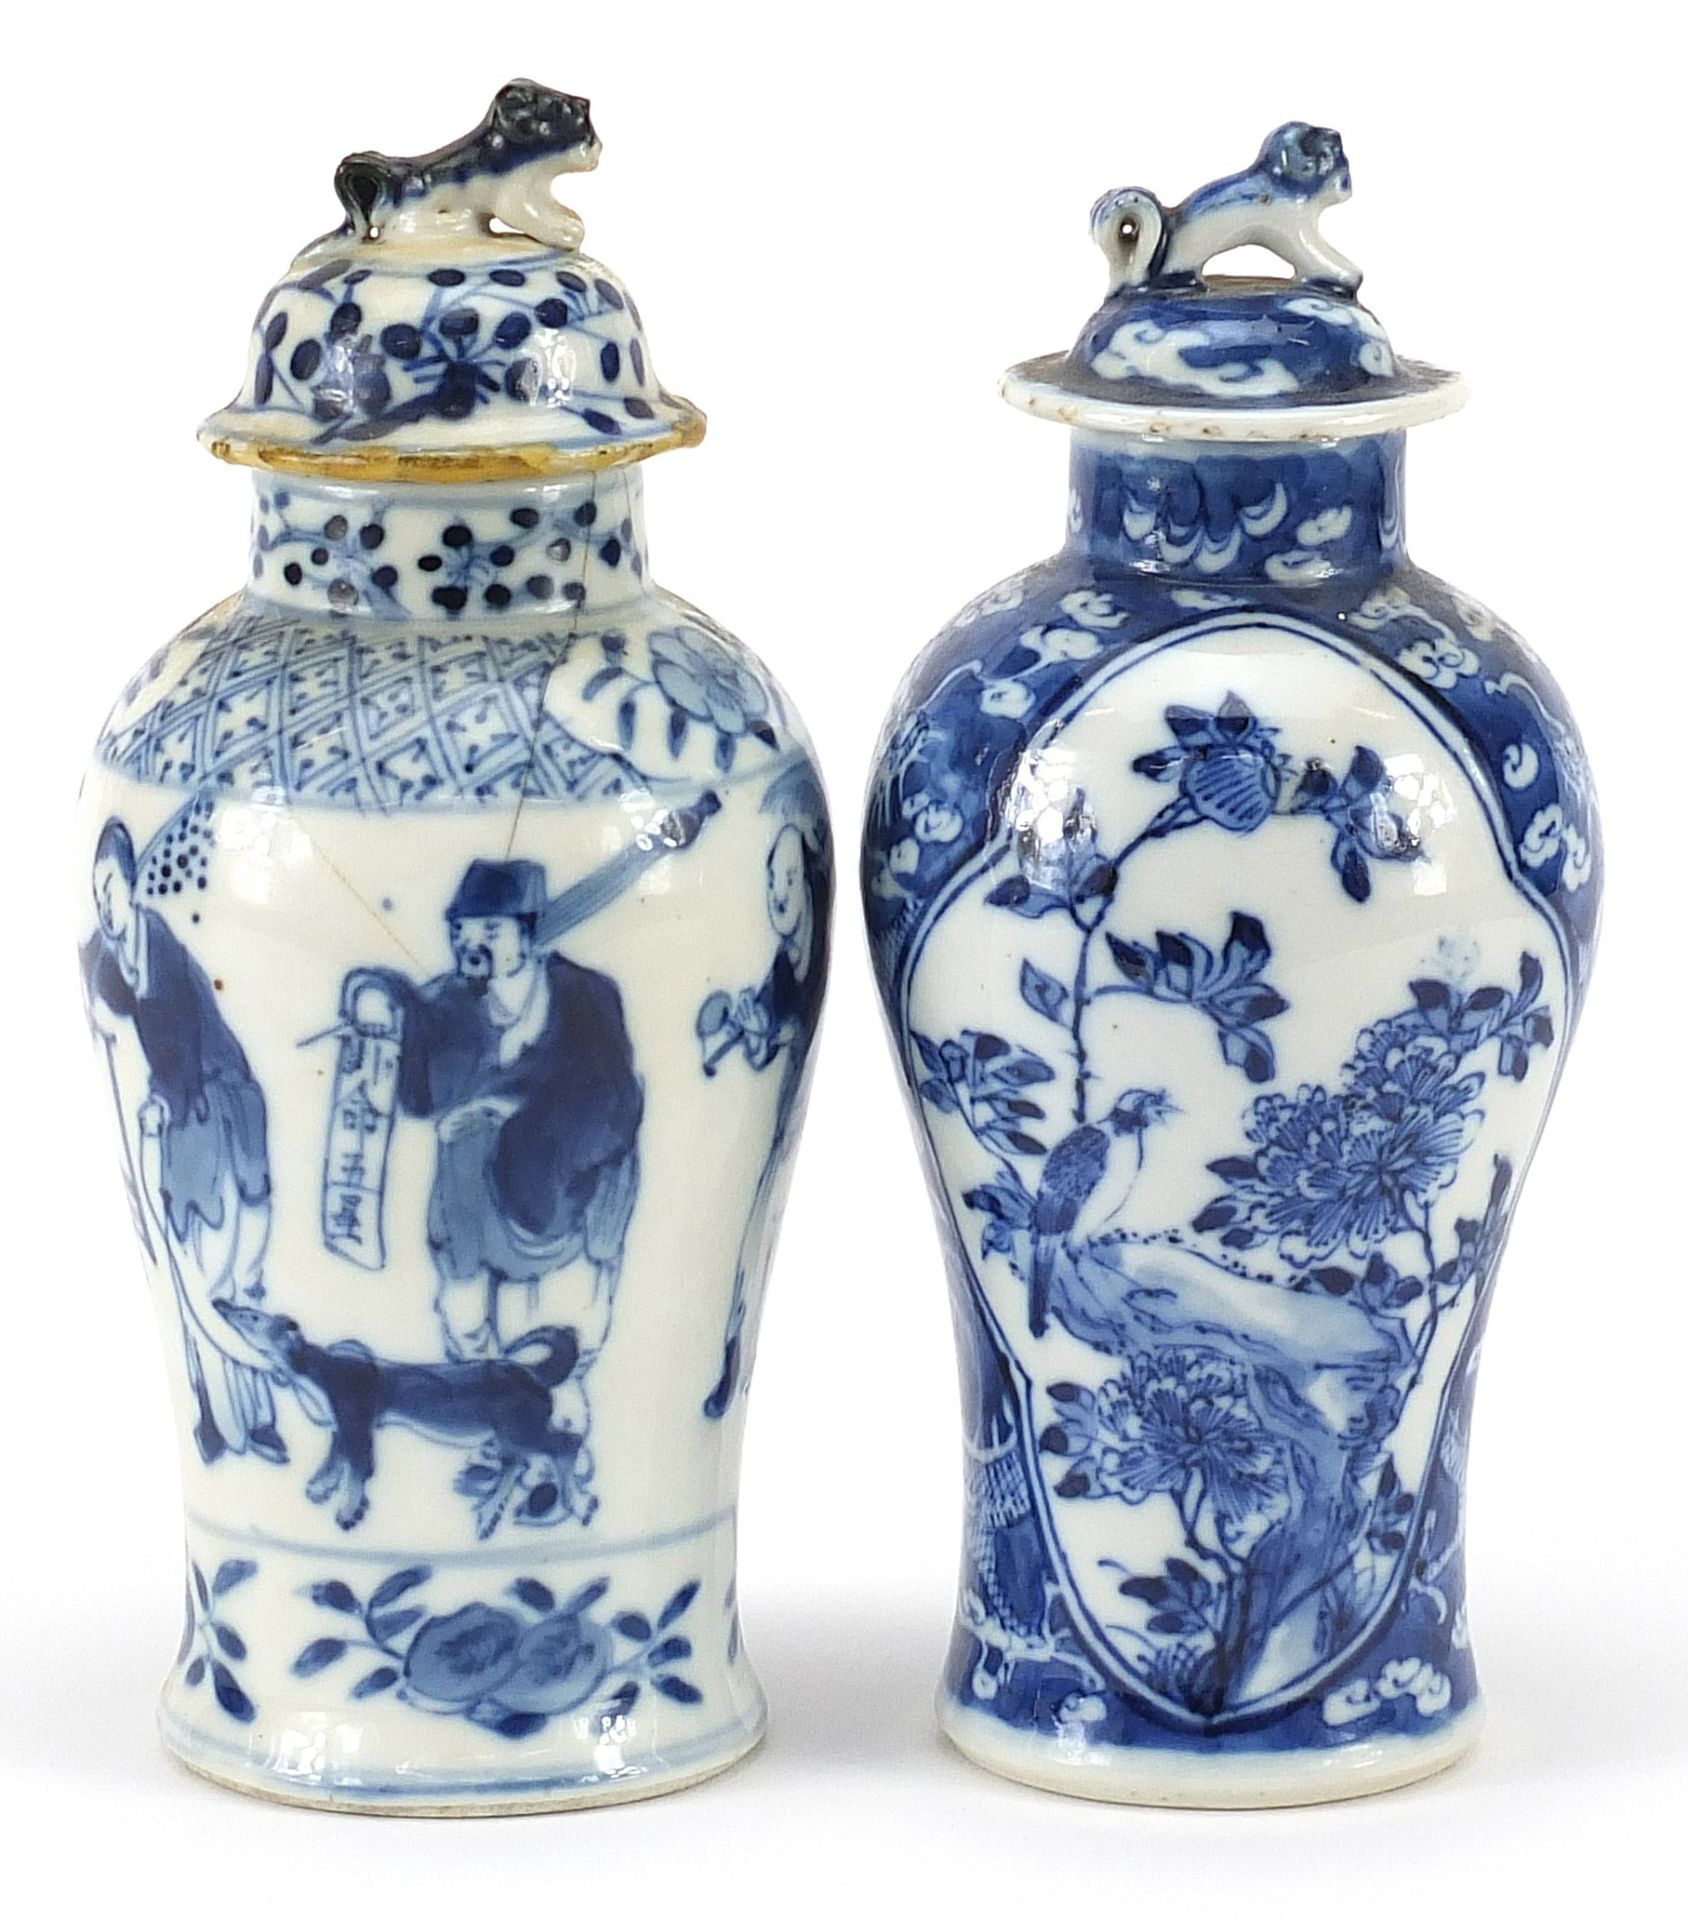 Two Chinese blue and white porcelain baluster vases with covers, hand painted with birds amongst - Image 2 of 3